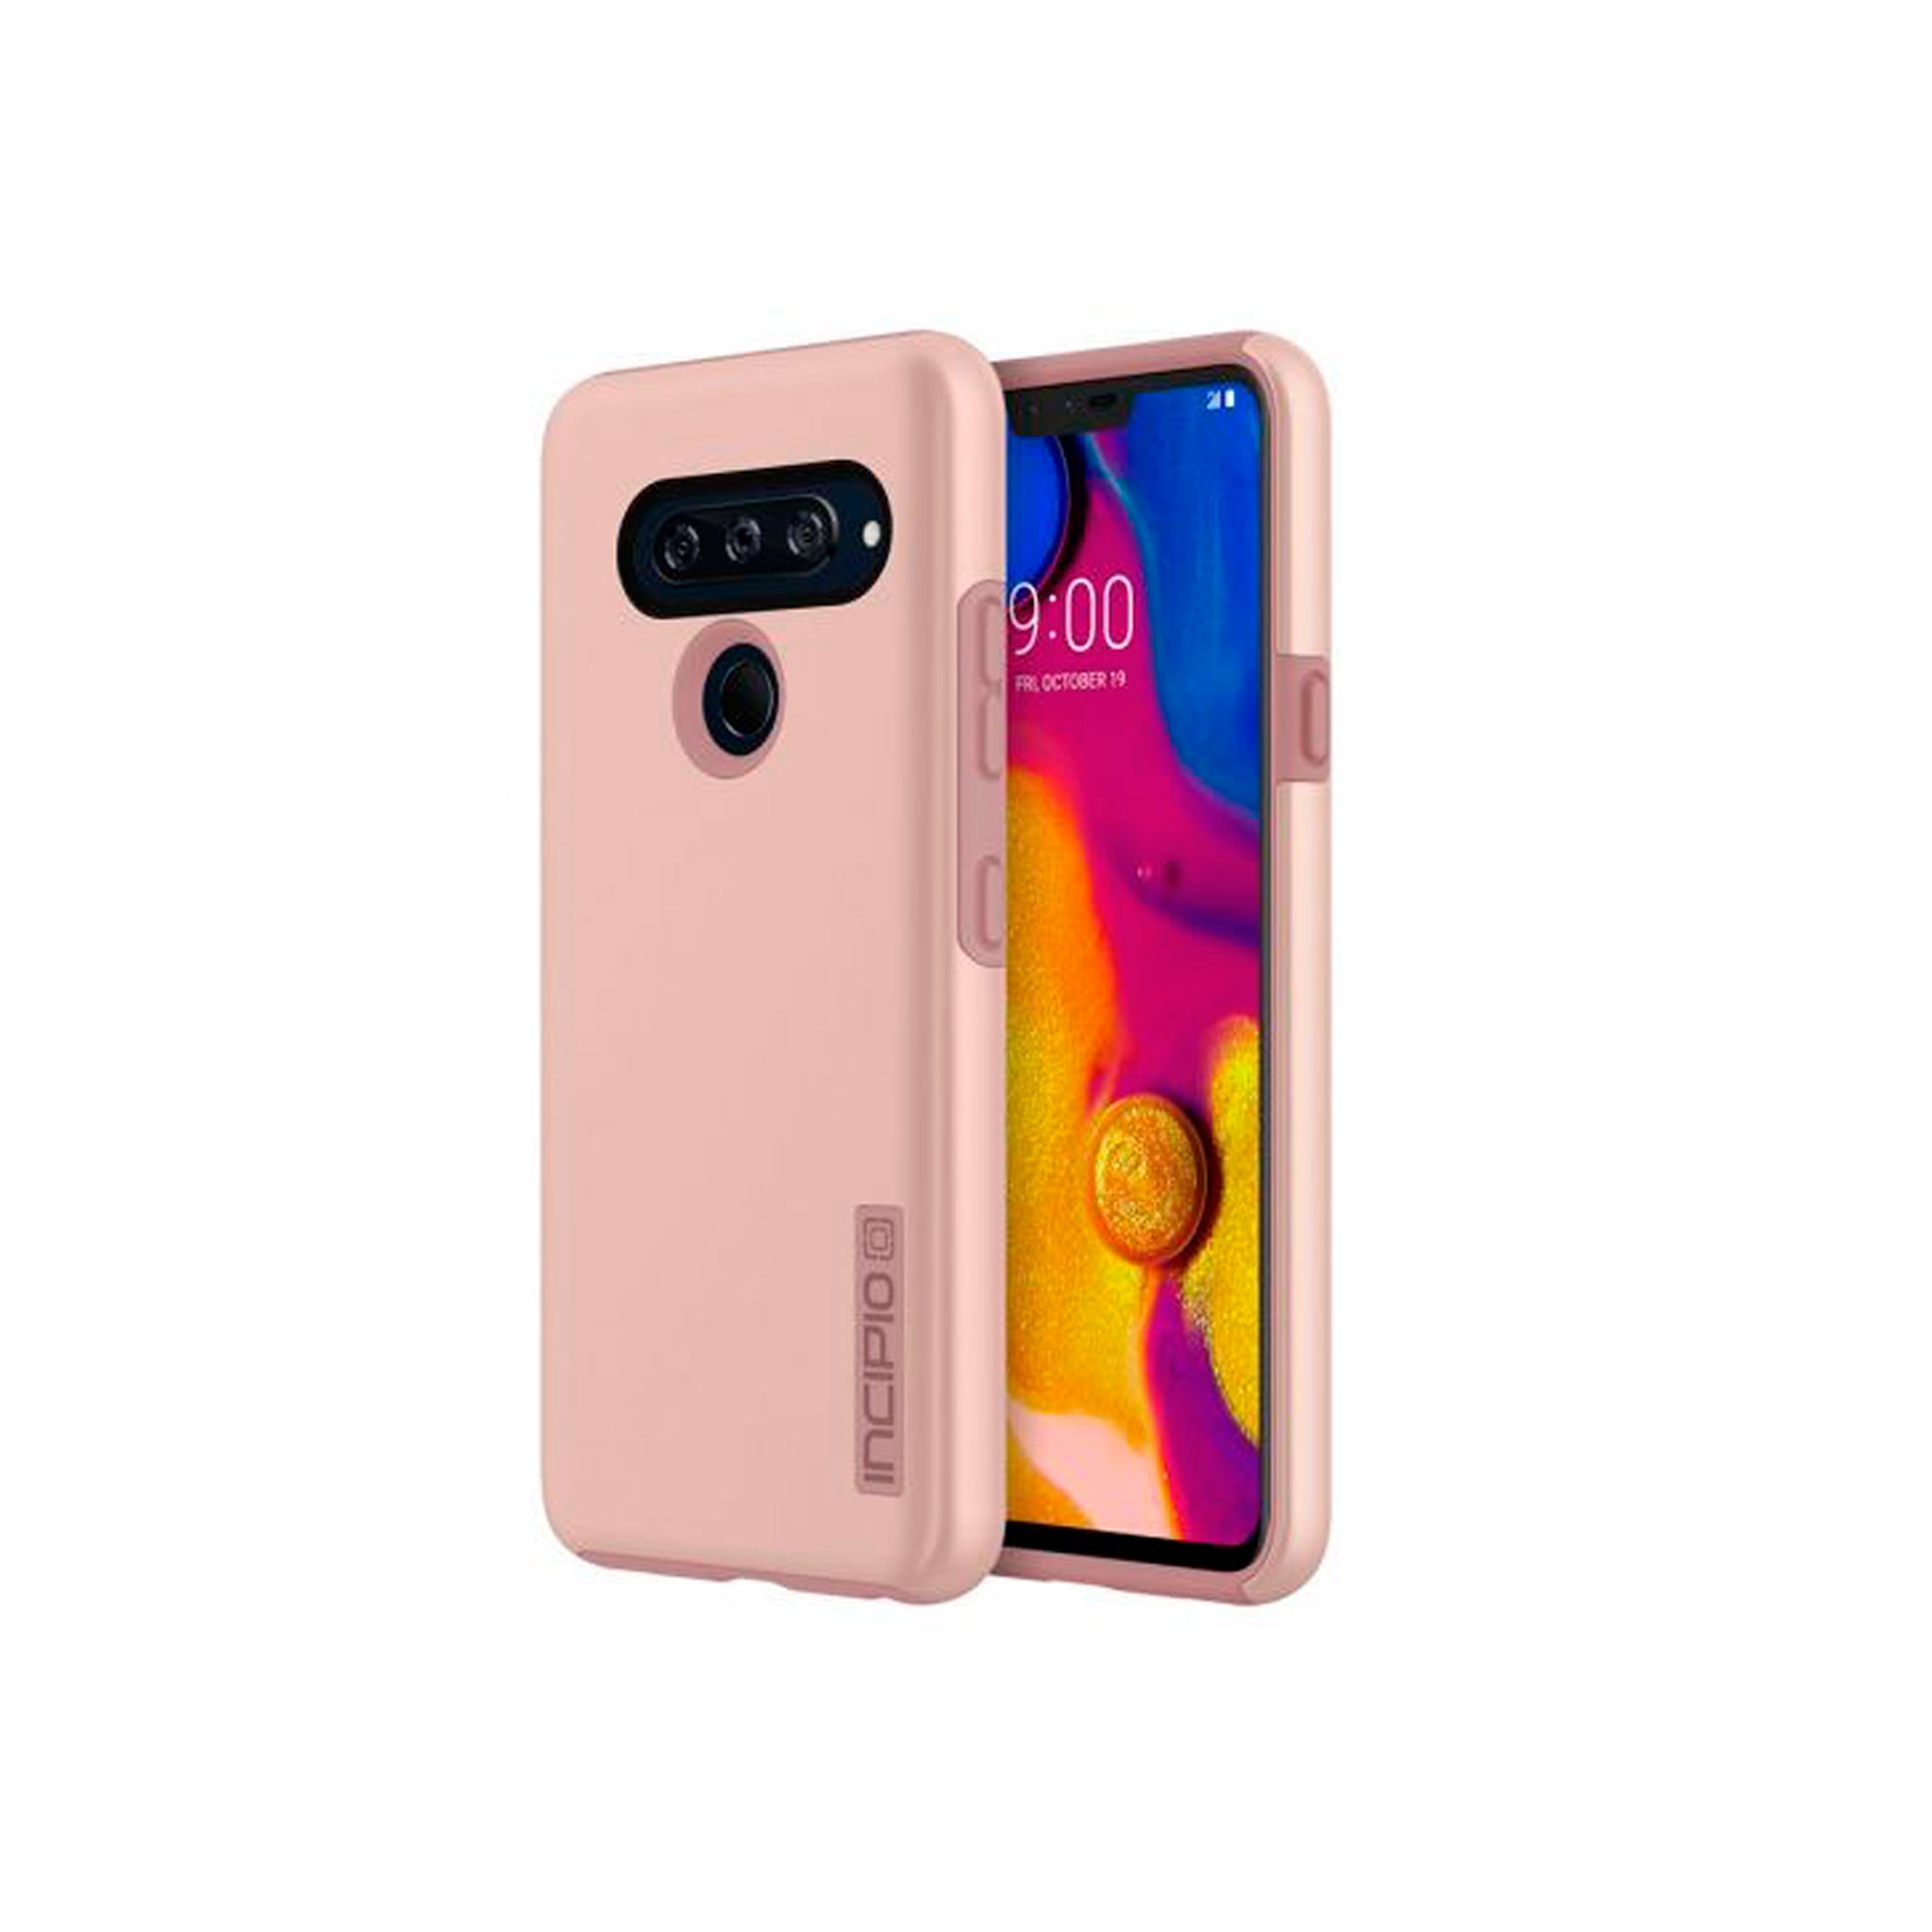 Incipio - DualPro Case For LG V40 Thinq - Iridescent Rose Gold And Pink